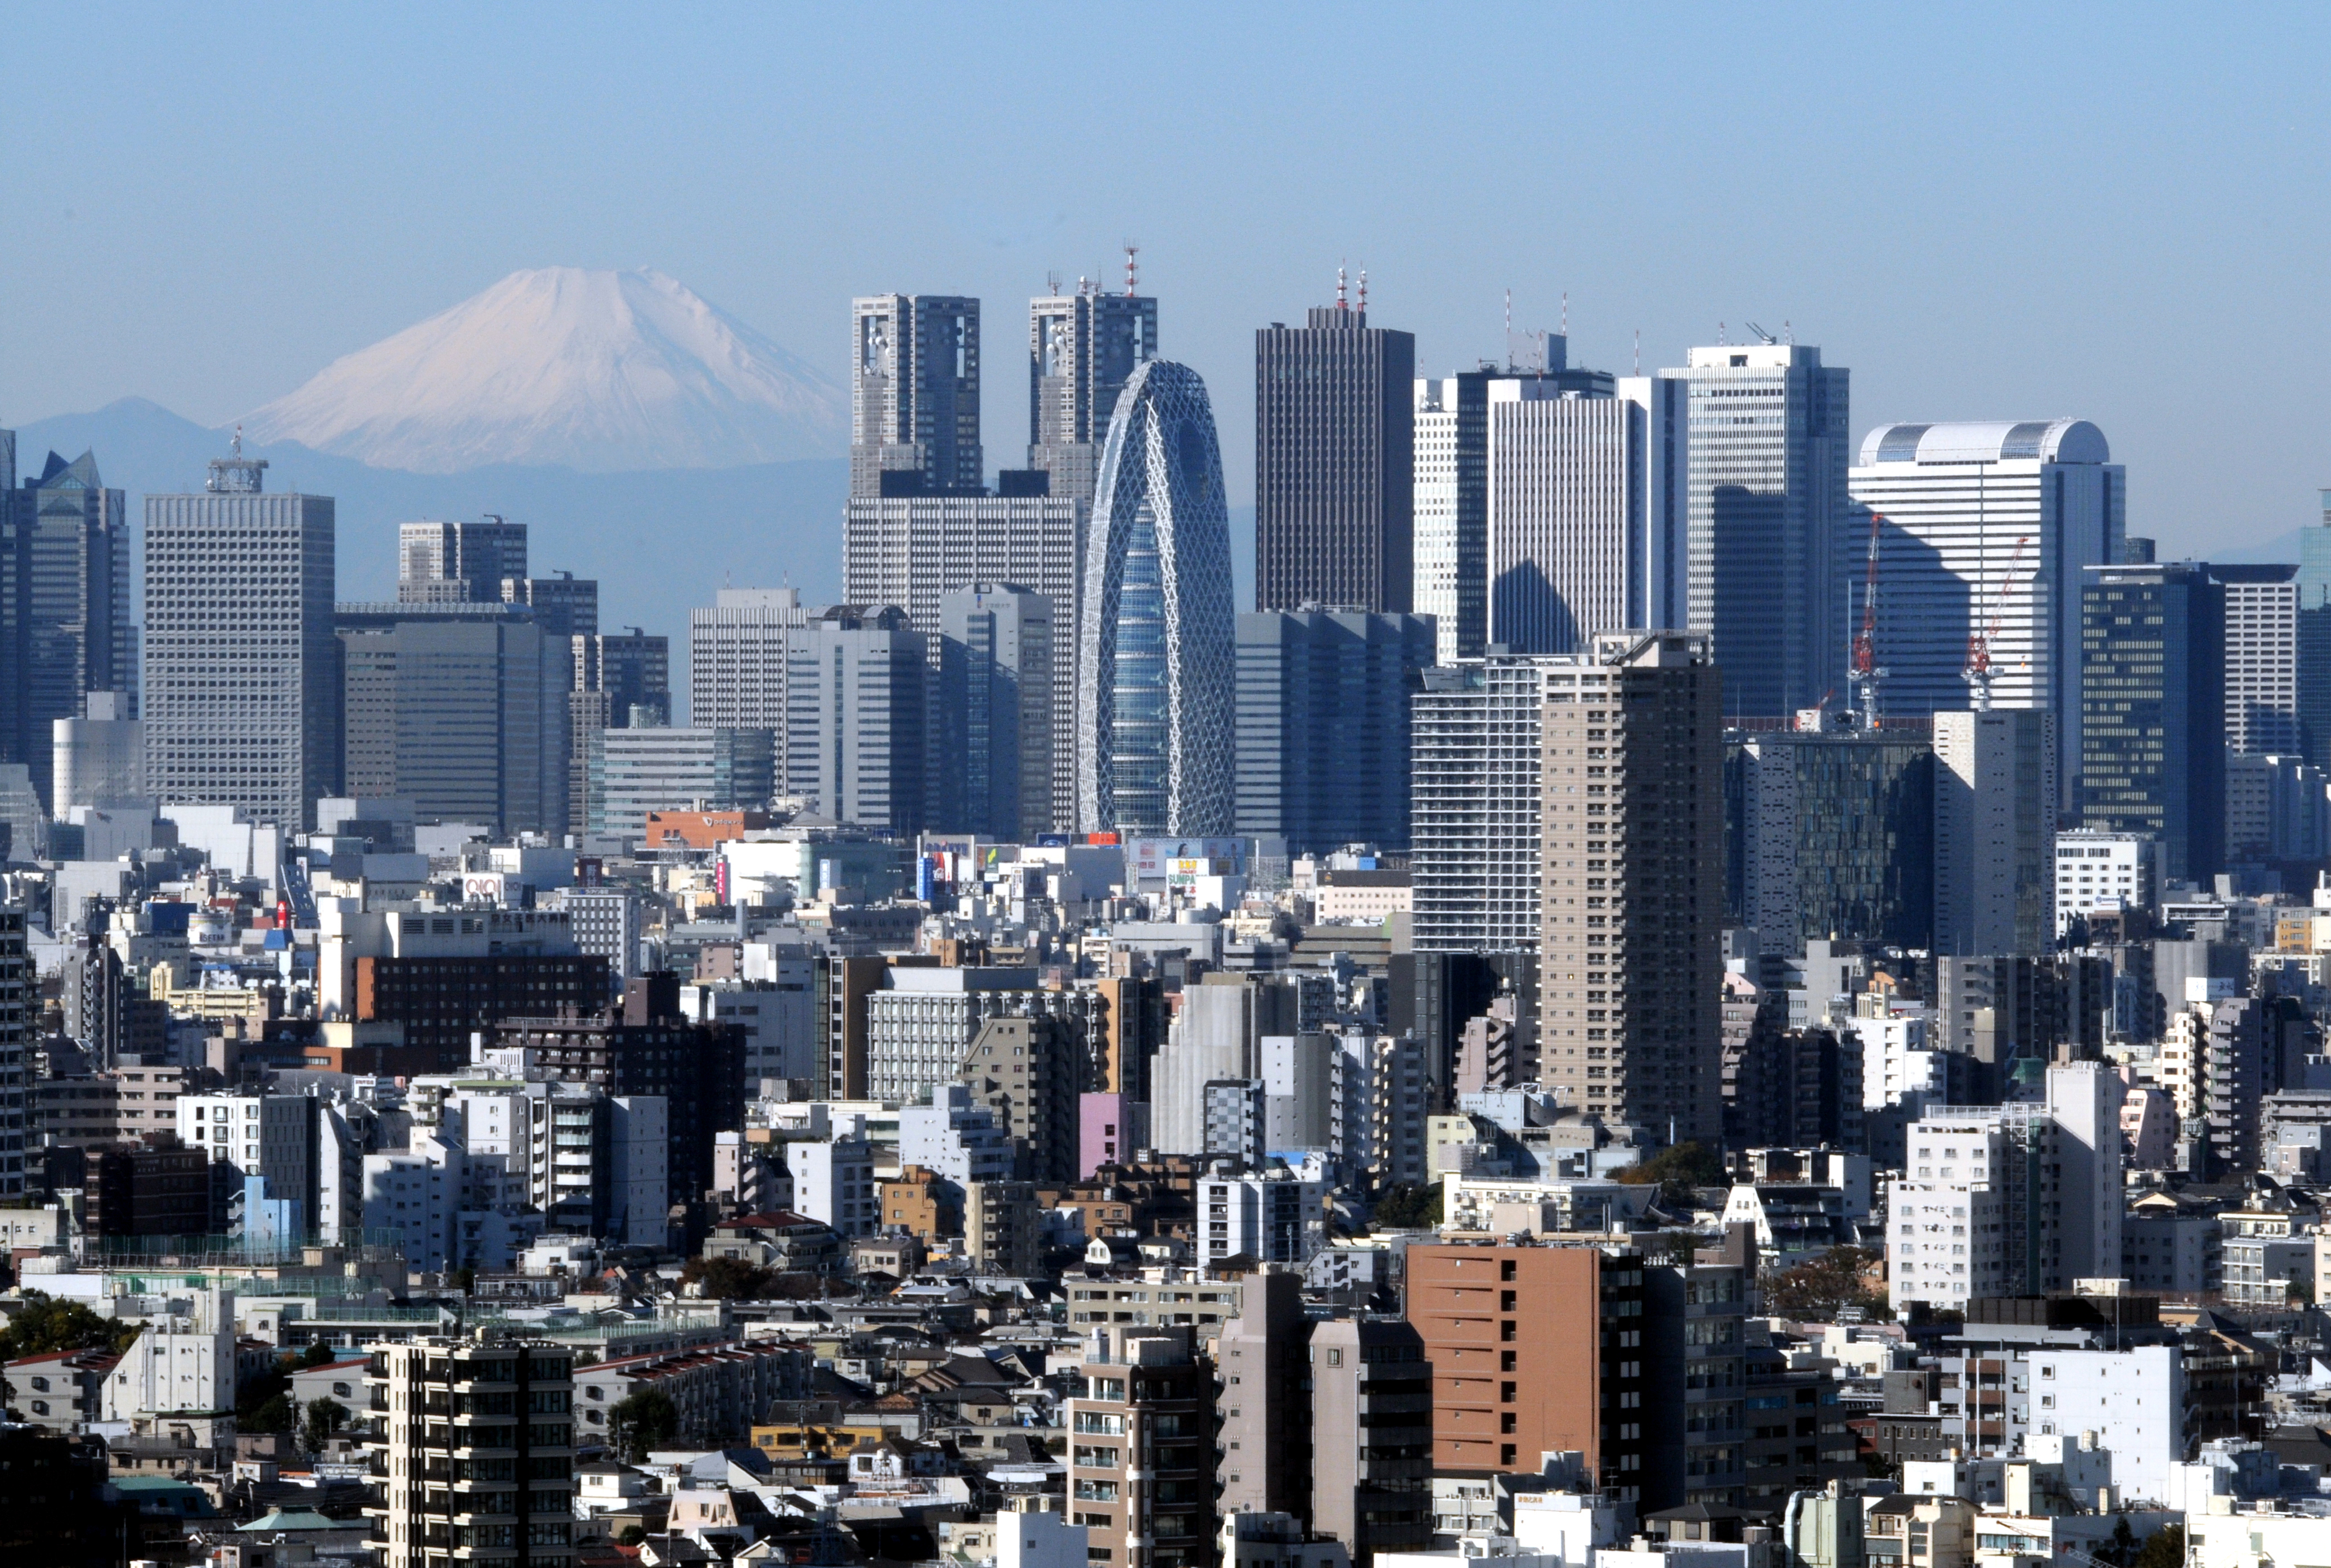 Concrete peaks: Mount Fuji, shown in December, provides a dramatic backdrop for the twin towers of City Hall and the dozens of other skyscrapers that have been erected on the west side of Shinjuku Station since the war. | SATOKO KAWASAKI